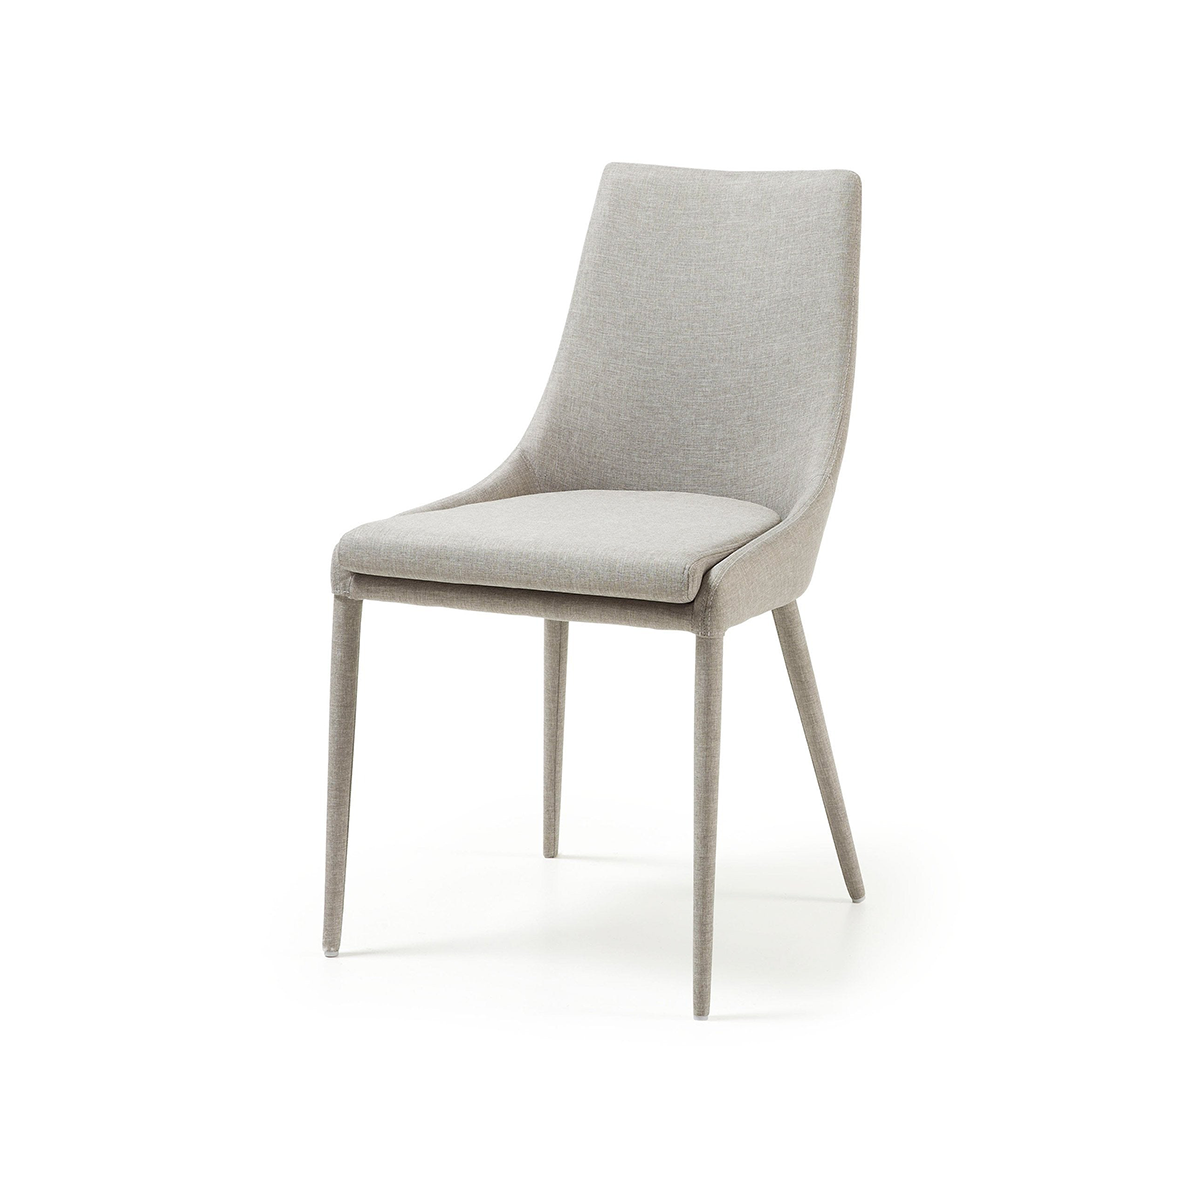 FondHouse Pinto Fabric Dining Chair - Light Grey